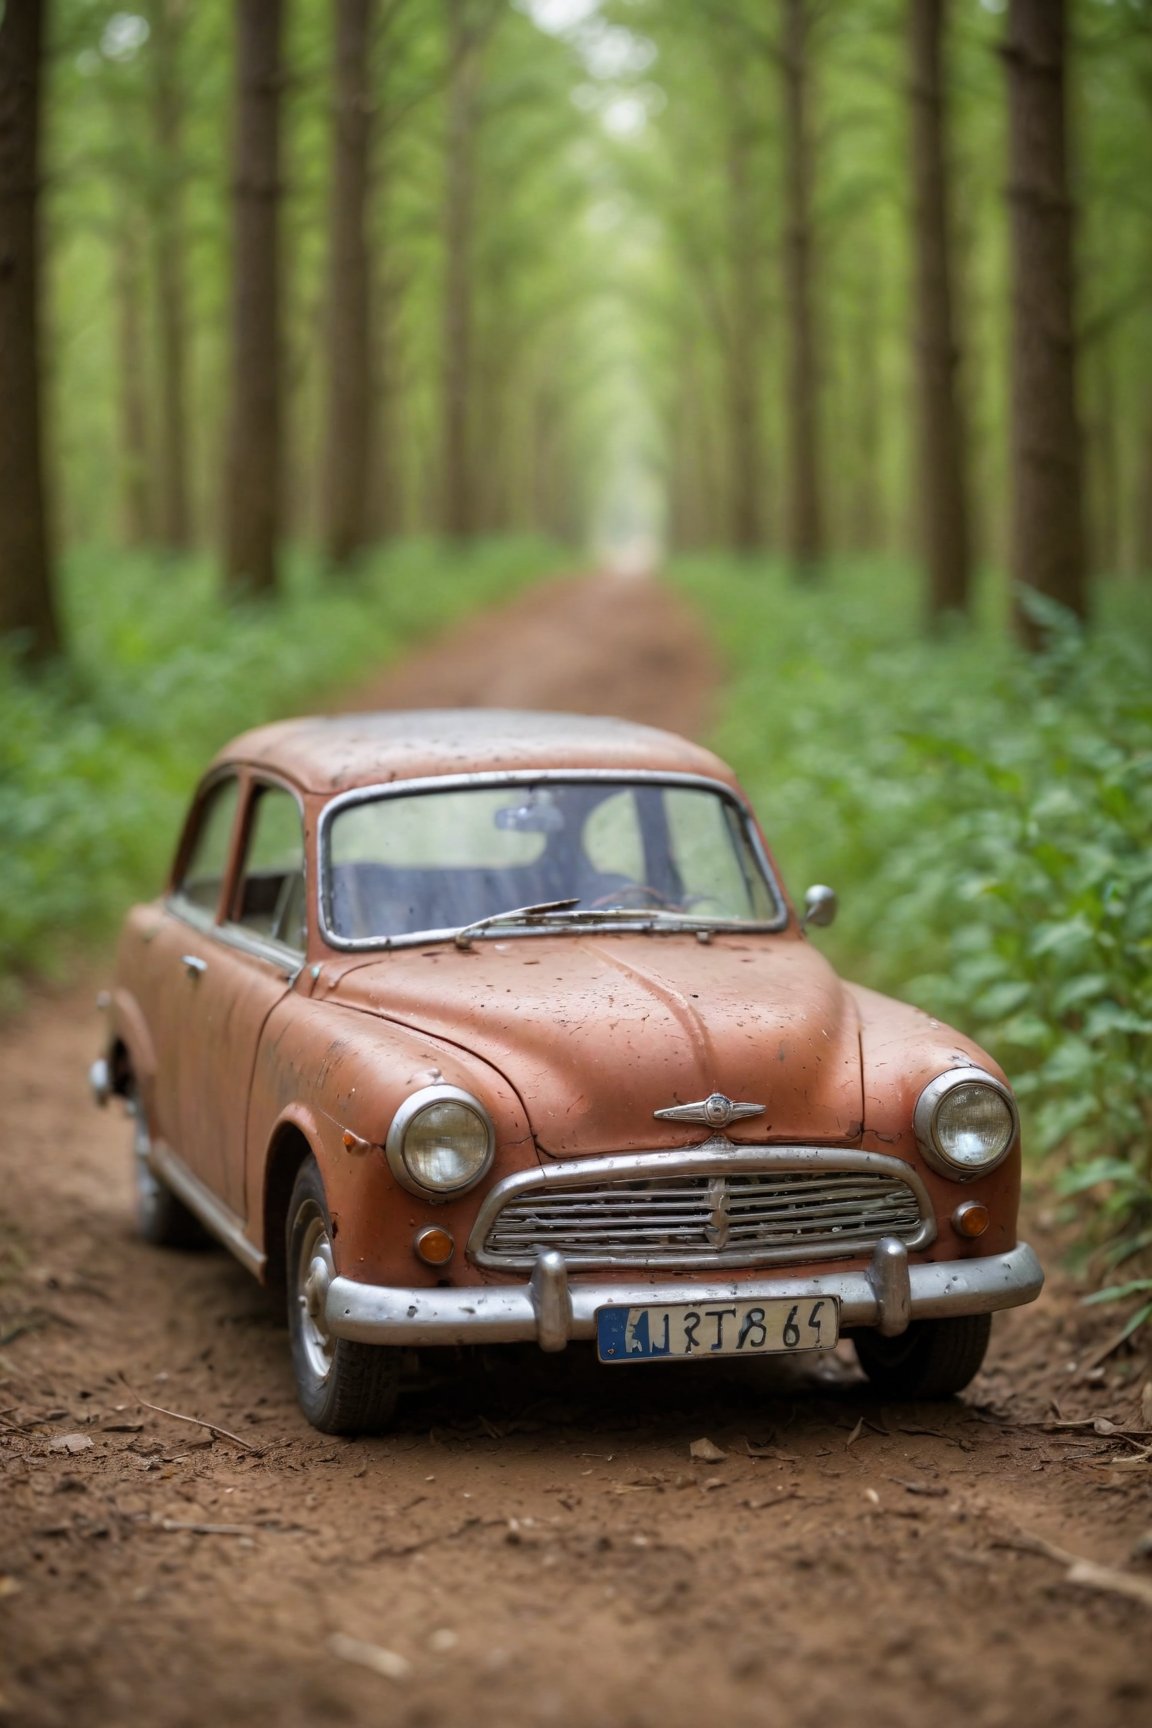 (best quality,8K,highres,masterpiece), an extraordinary macro shot capturing a tiny retro auto on slightly muddy ground. The scene is bathed in a fresh morning atmosphere, with soft bokeh creating a mesmerizing background. The close-up perspective highlights every intricate detail of the vintage vehicle, from its weathered exterior to its tiny wheels. The amazing depth of field draws the viewer's eye, immersing them in the scene and evoking a sense of wonder. This artwork transports the audience to a nostalgic yet vibrant setting, where the beauty of the mundane is captured in stunning detail.